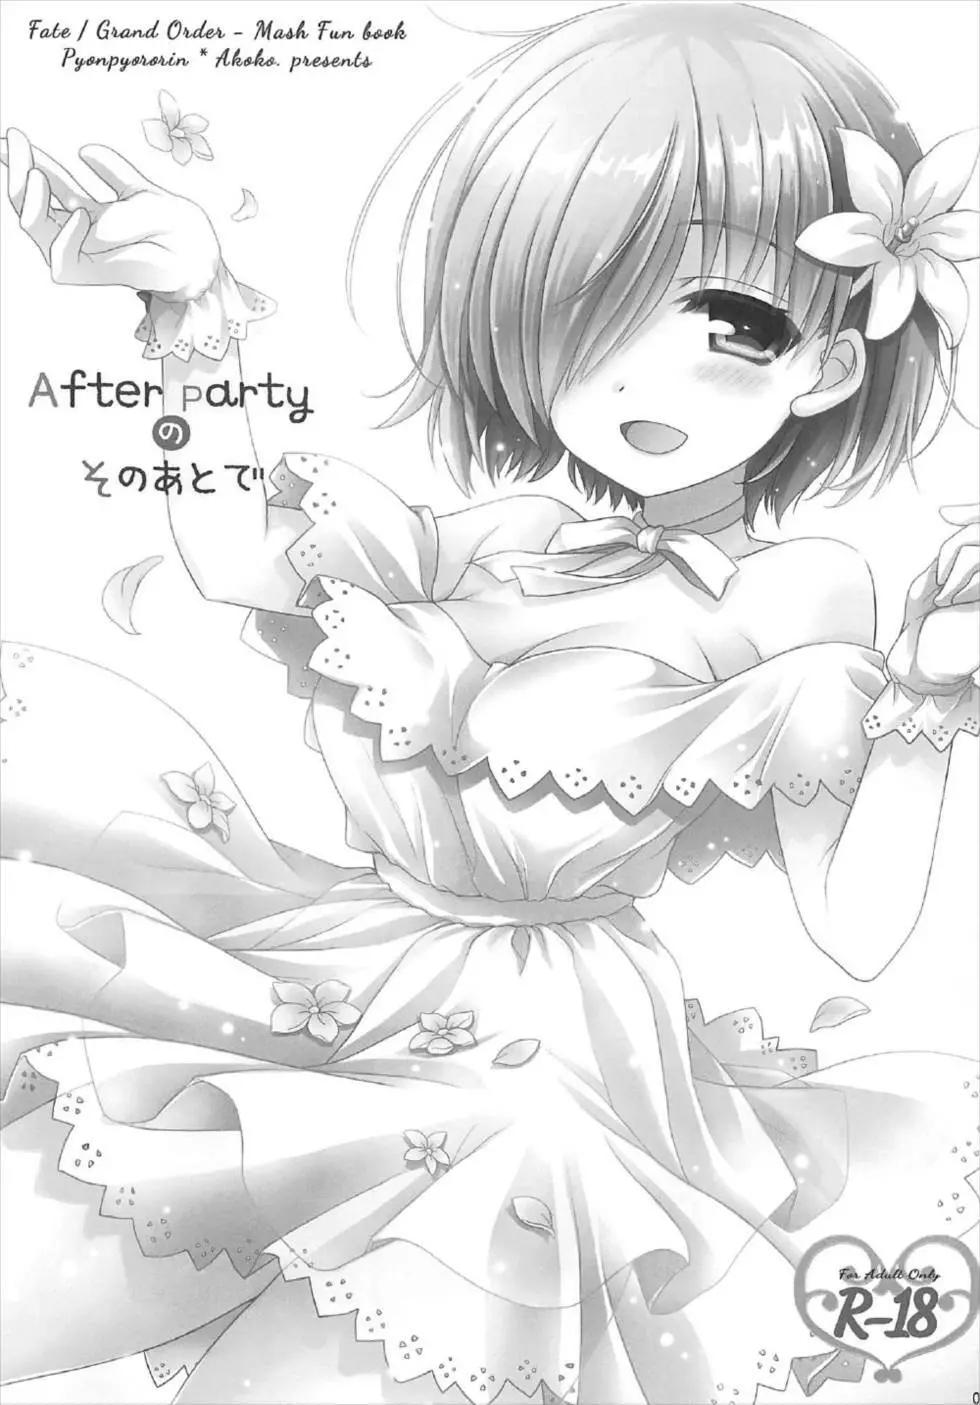 After Partyのそのあとで 2ページ